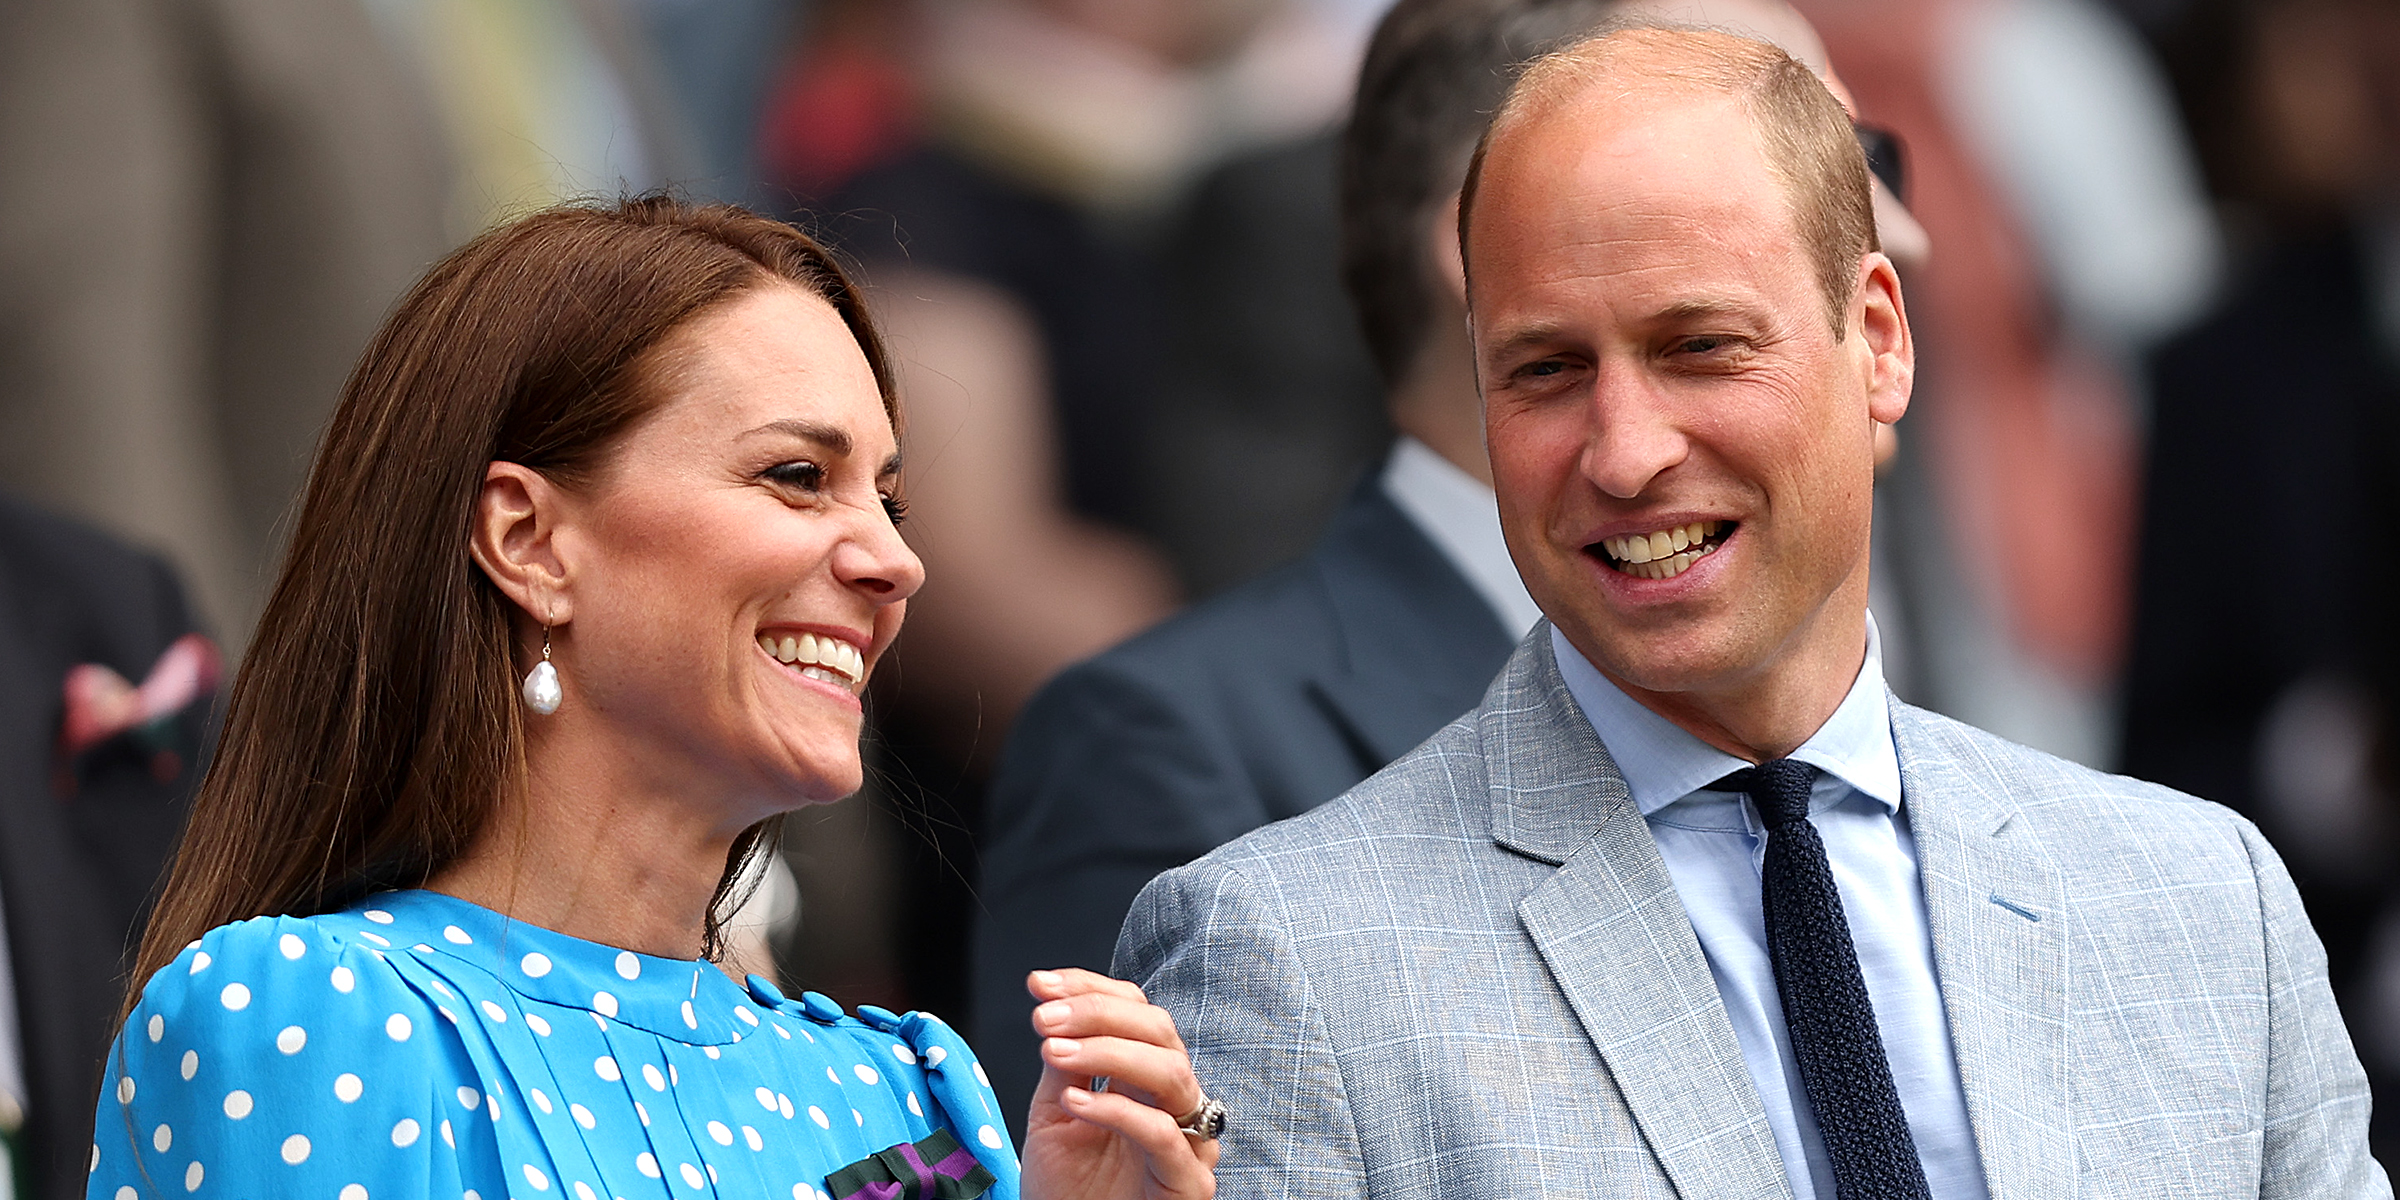 Princess Catherine and Prince William | Source: Getty Images